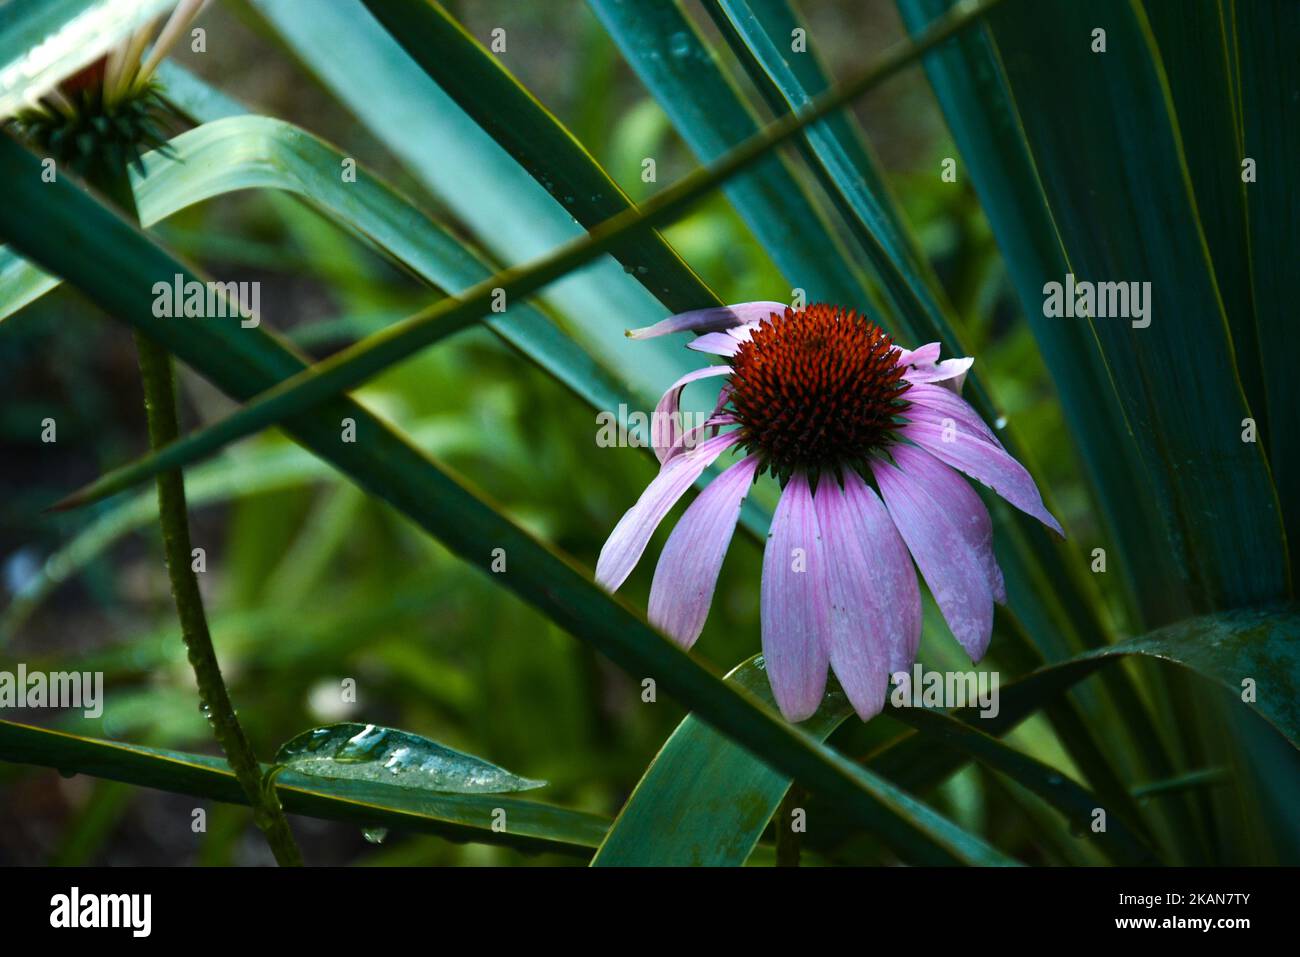 A close up of a beautiful coneflower surrounded by blade like green leaves Stock Photo